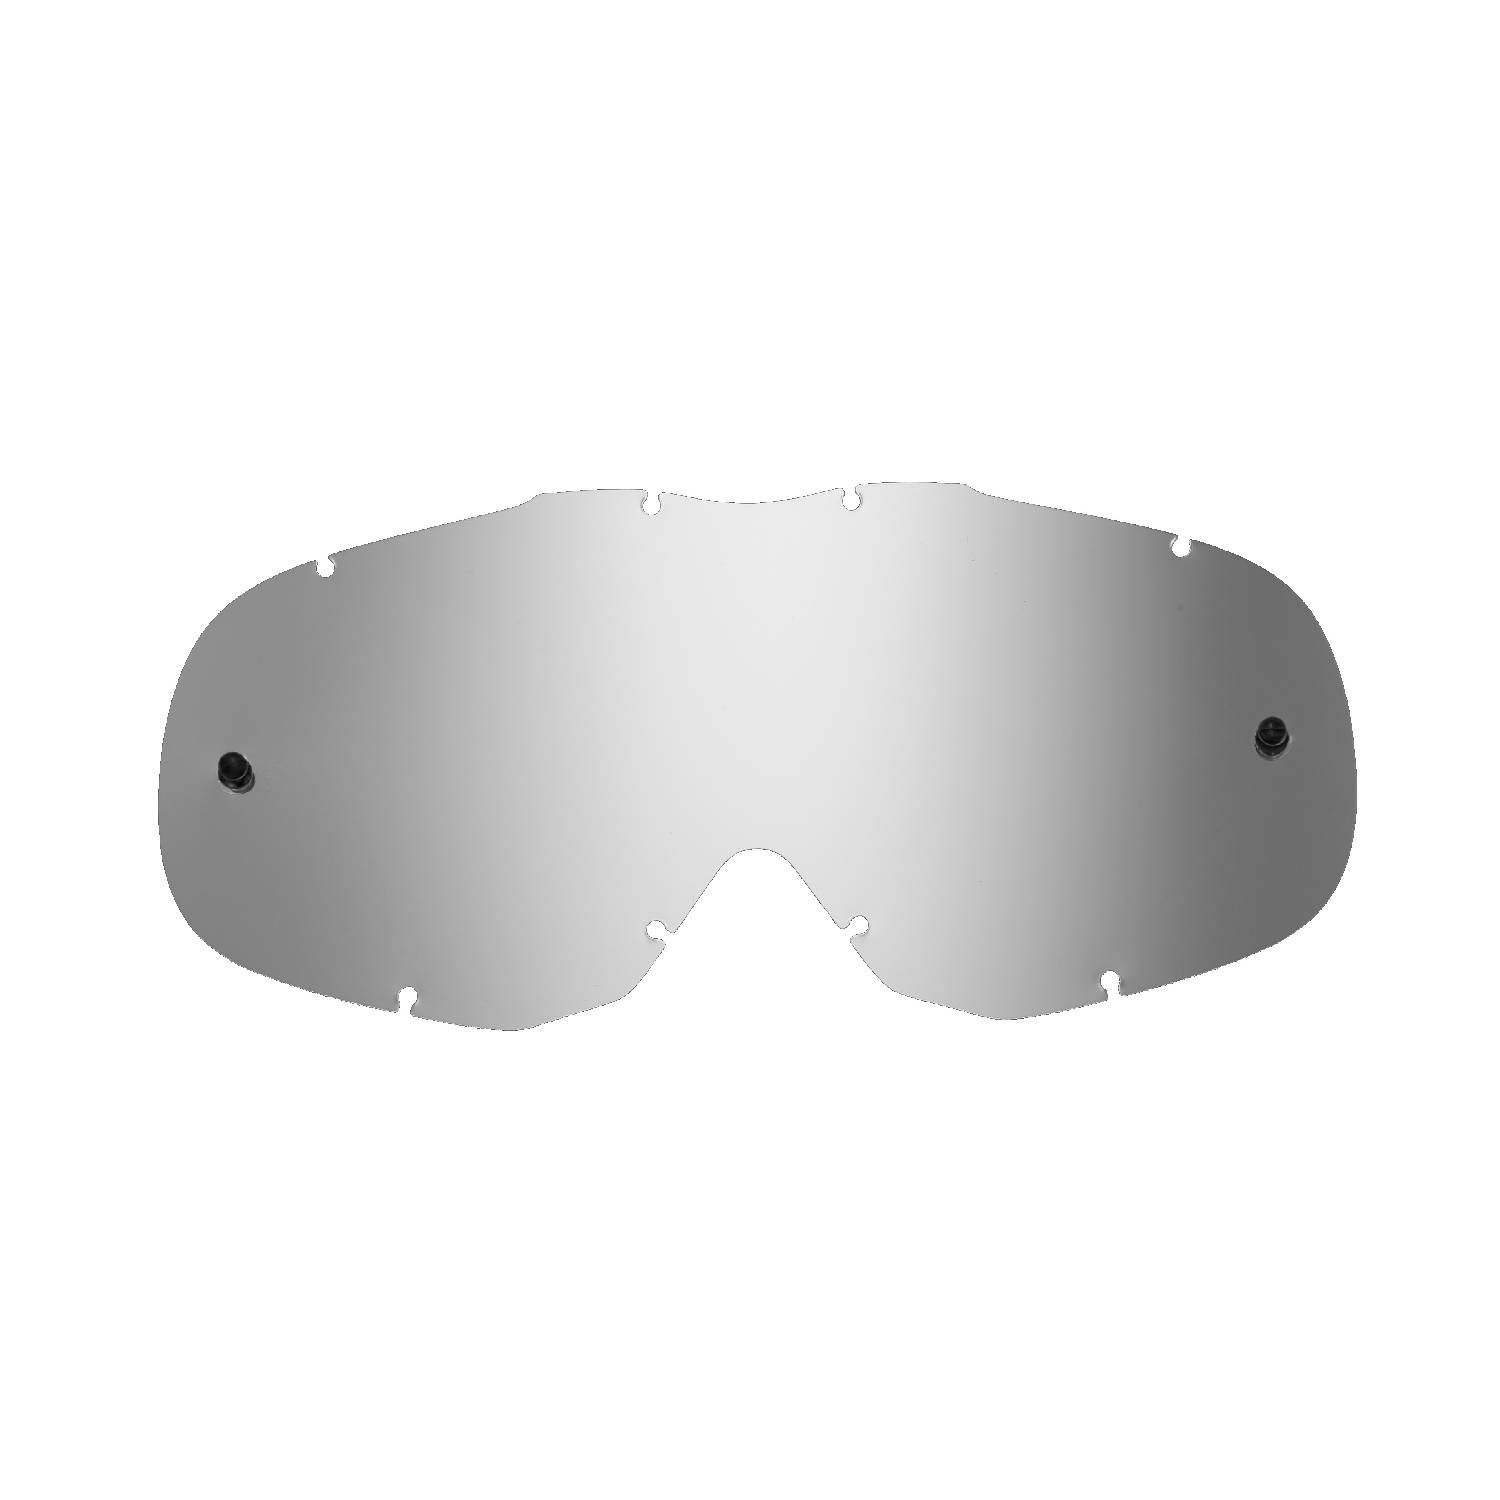 silver-toned mirrored replacement lenses for goggles compatible for Thor Ally goggle